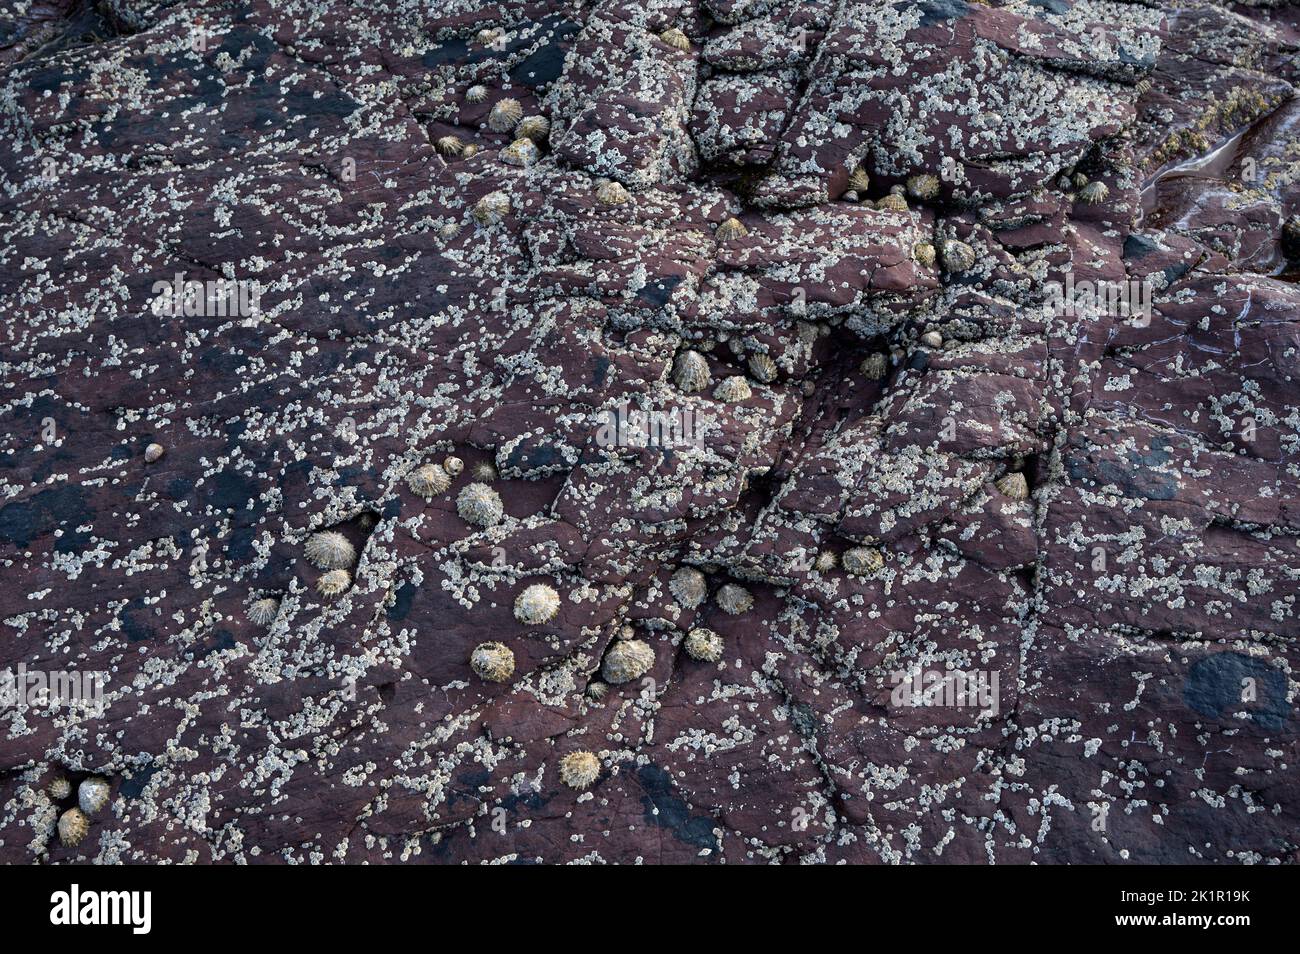 Wales, Pembrokeshire. Maroon rocks with limpets; Stock Photo